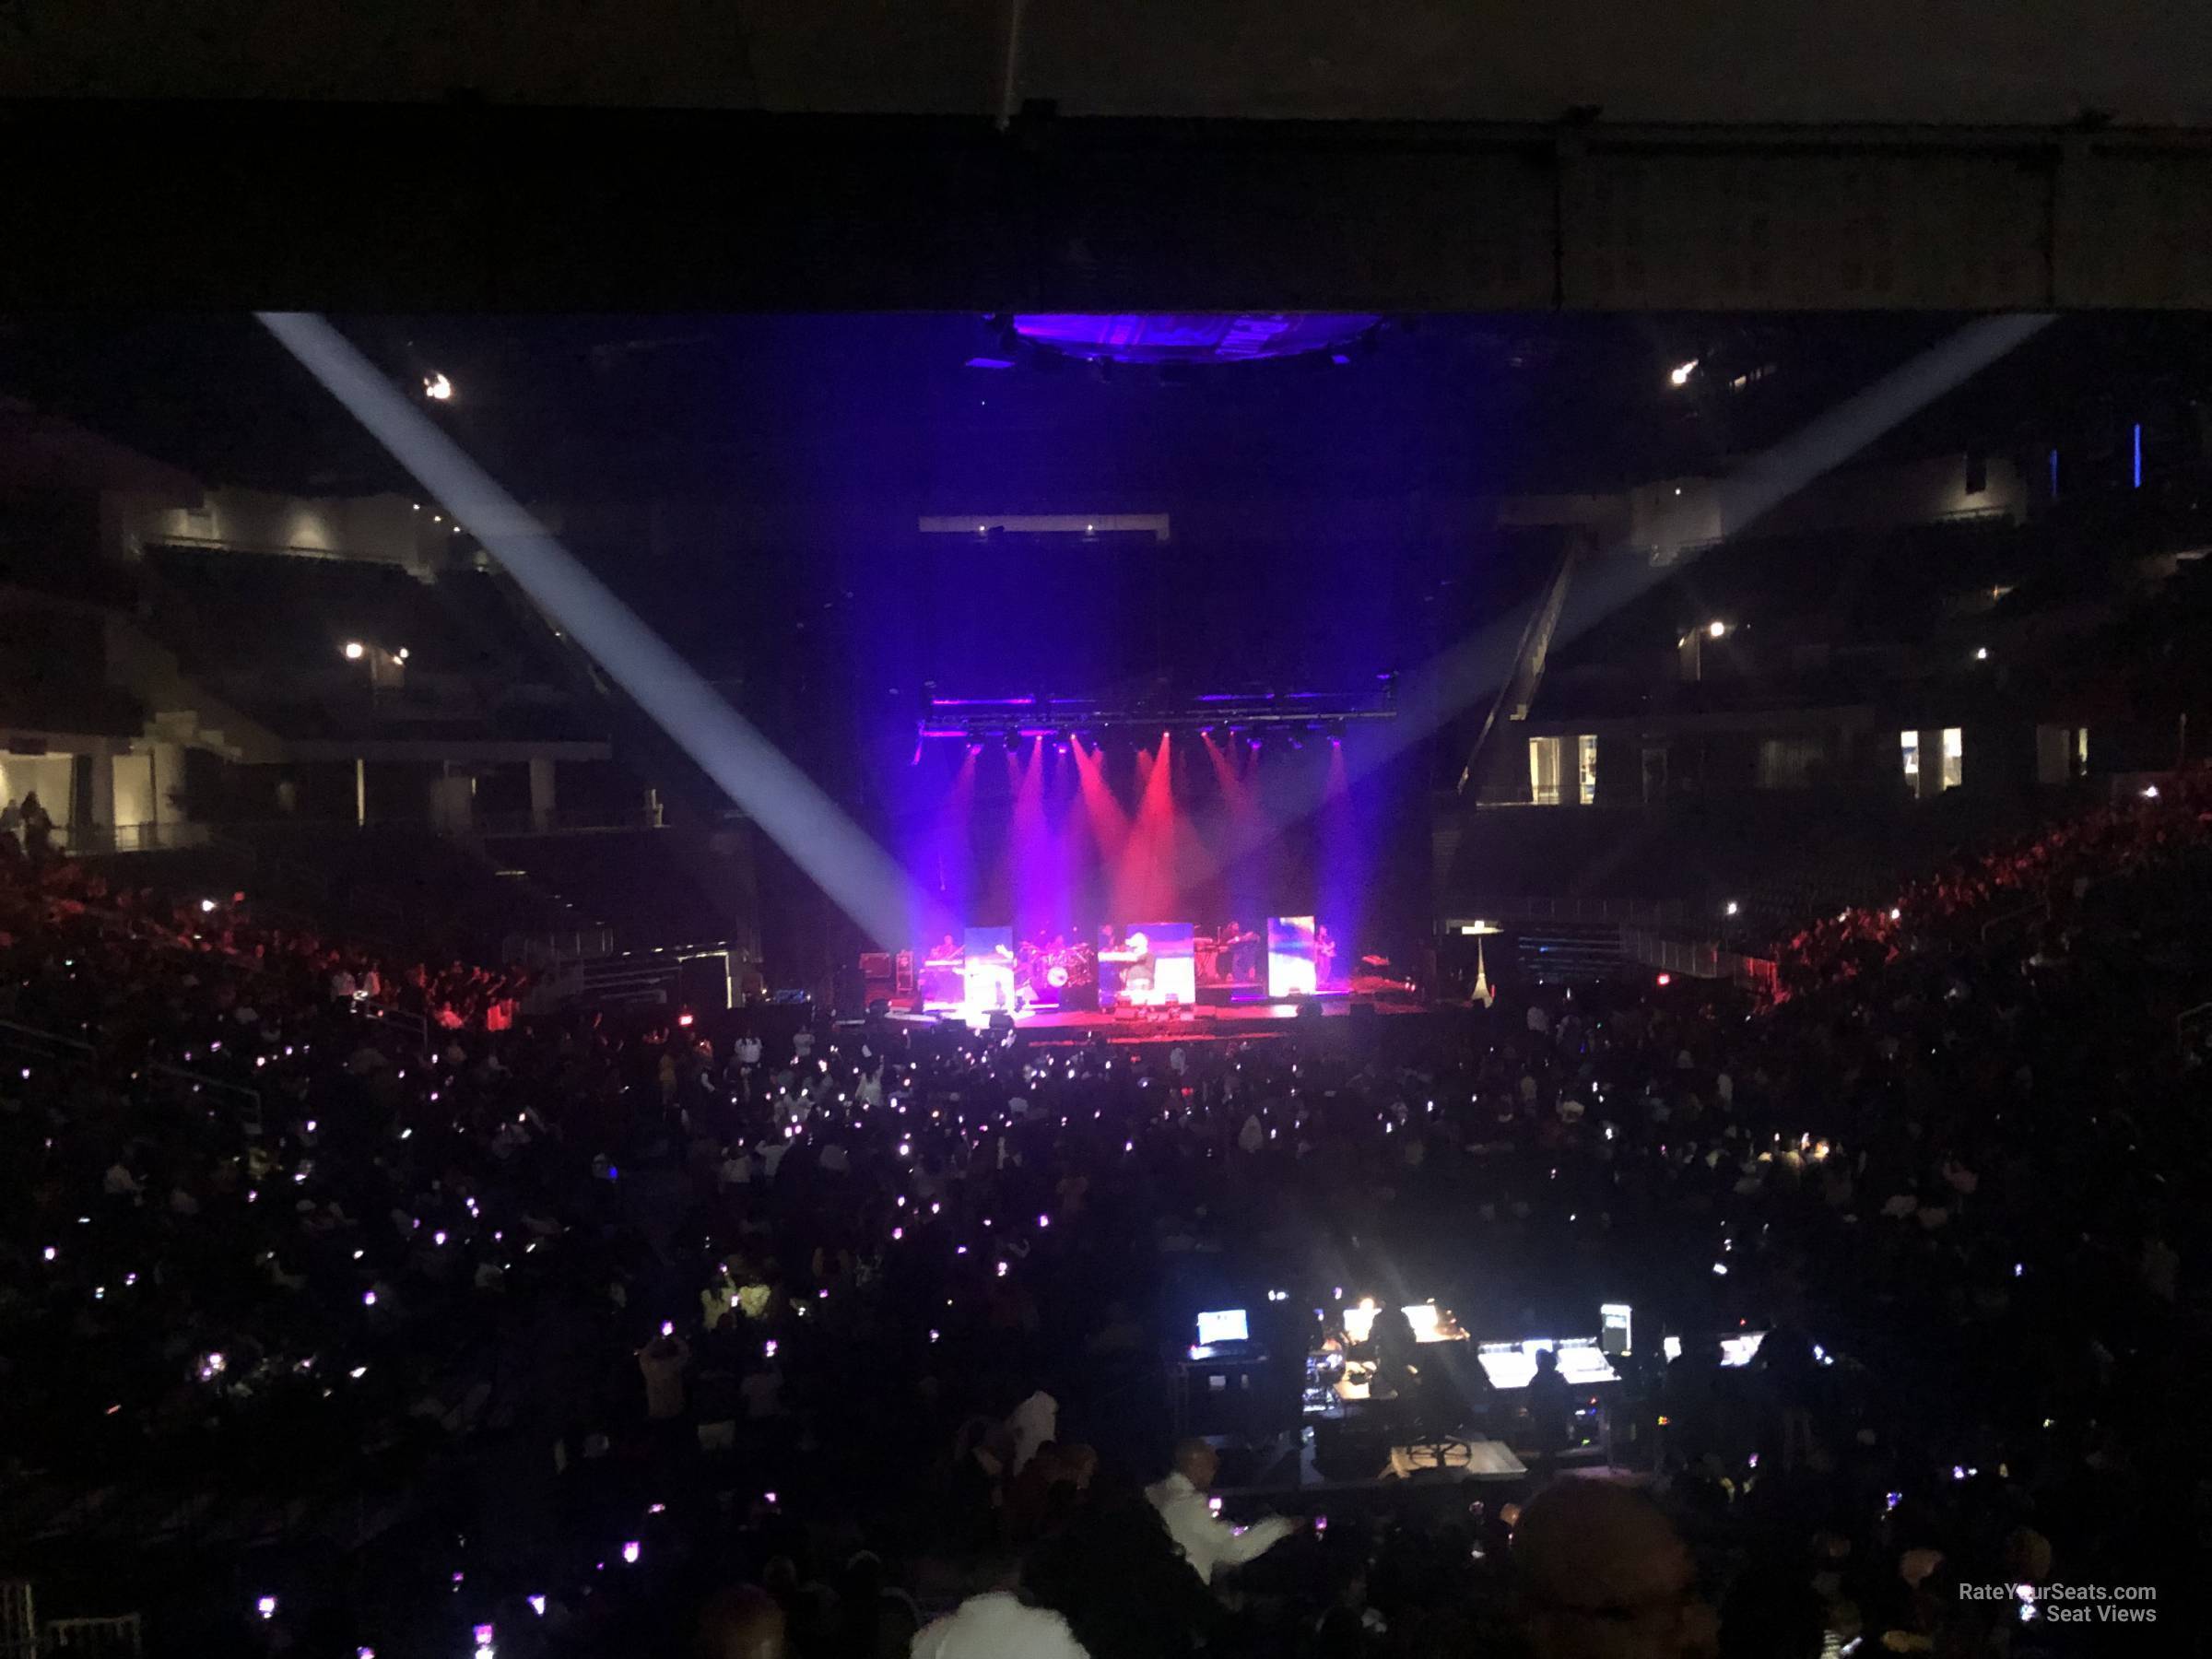 section 103, row q seat view  for concert - wintrust arena